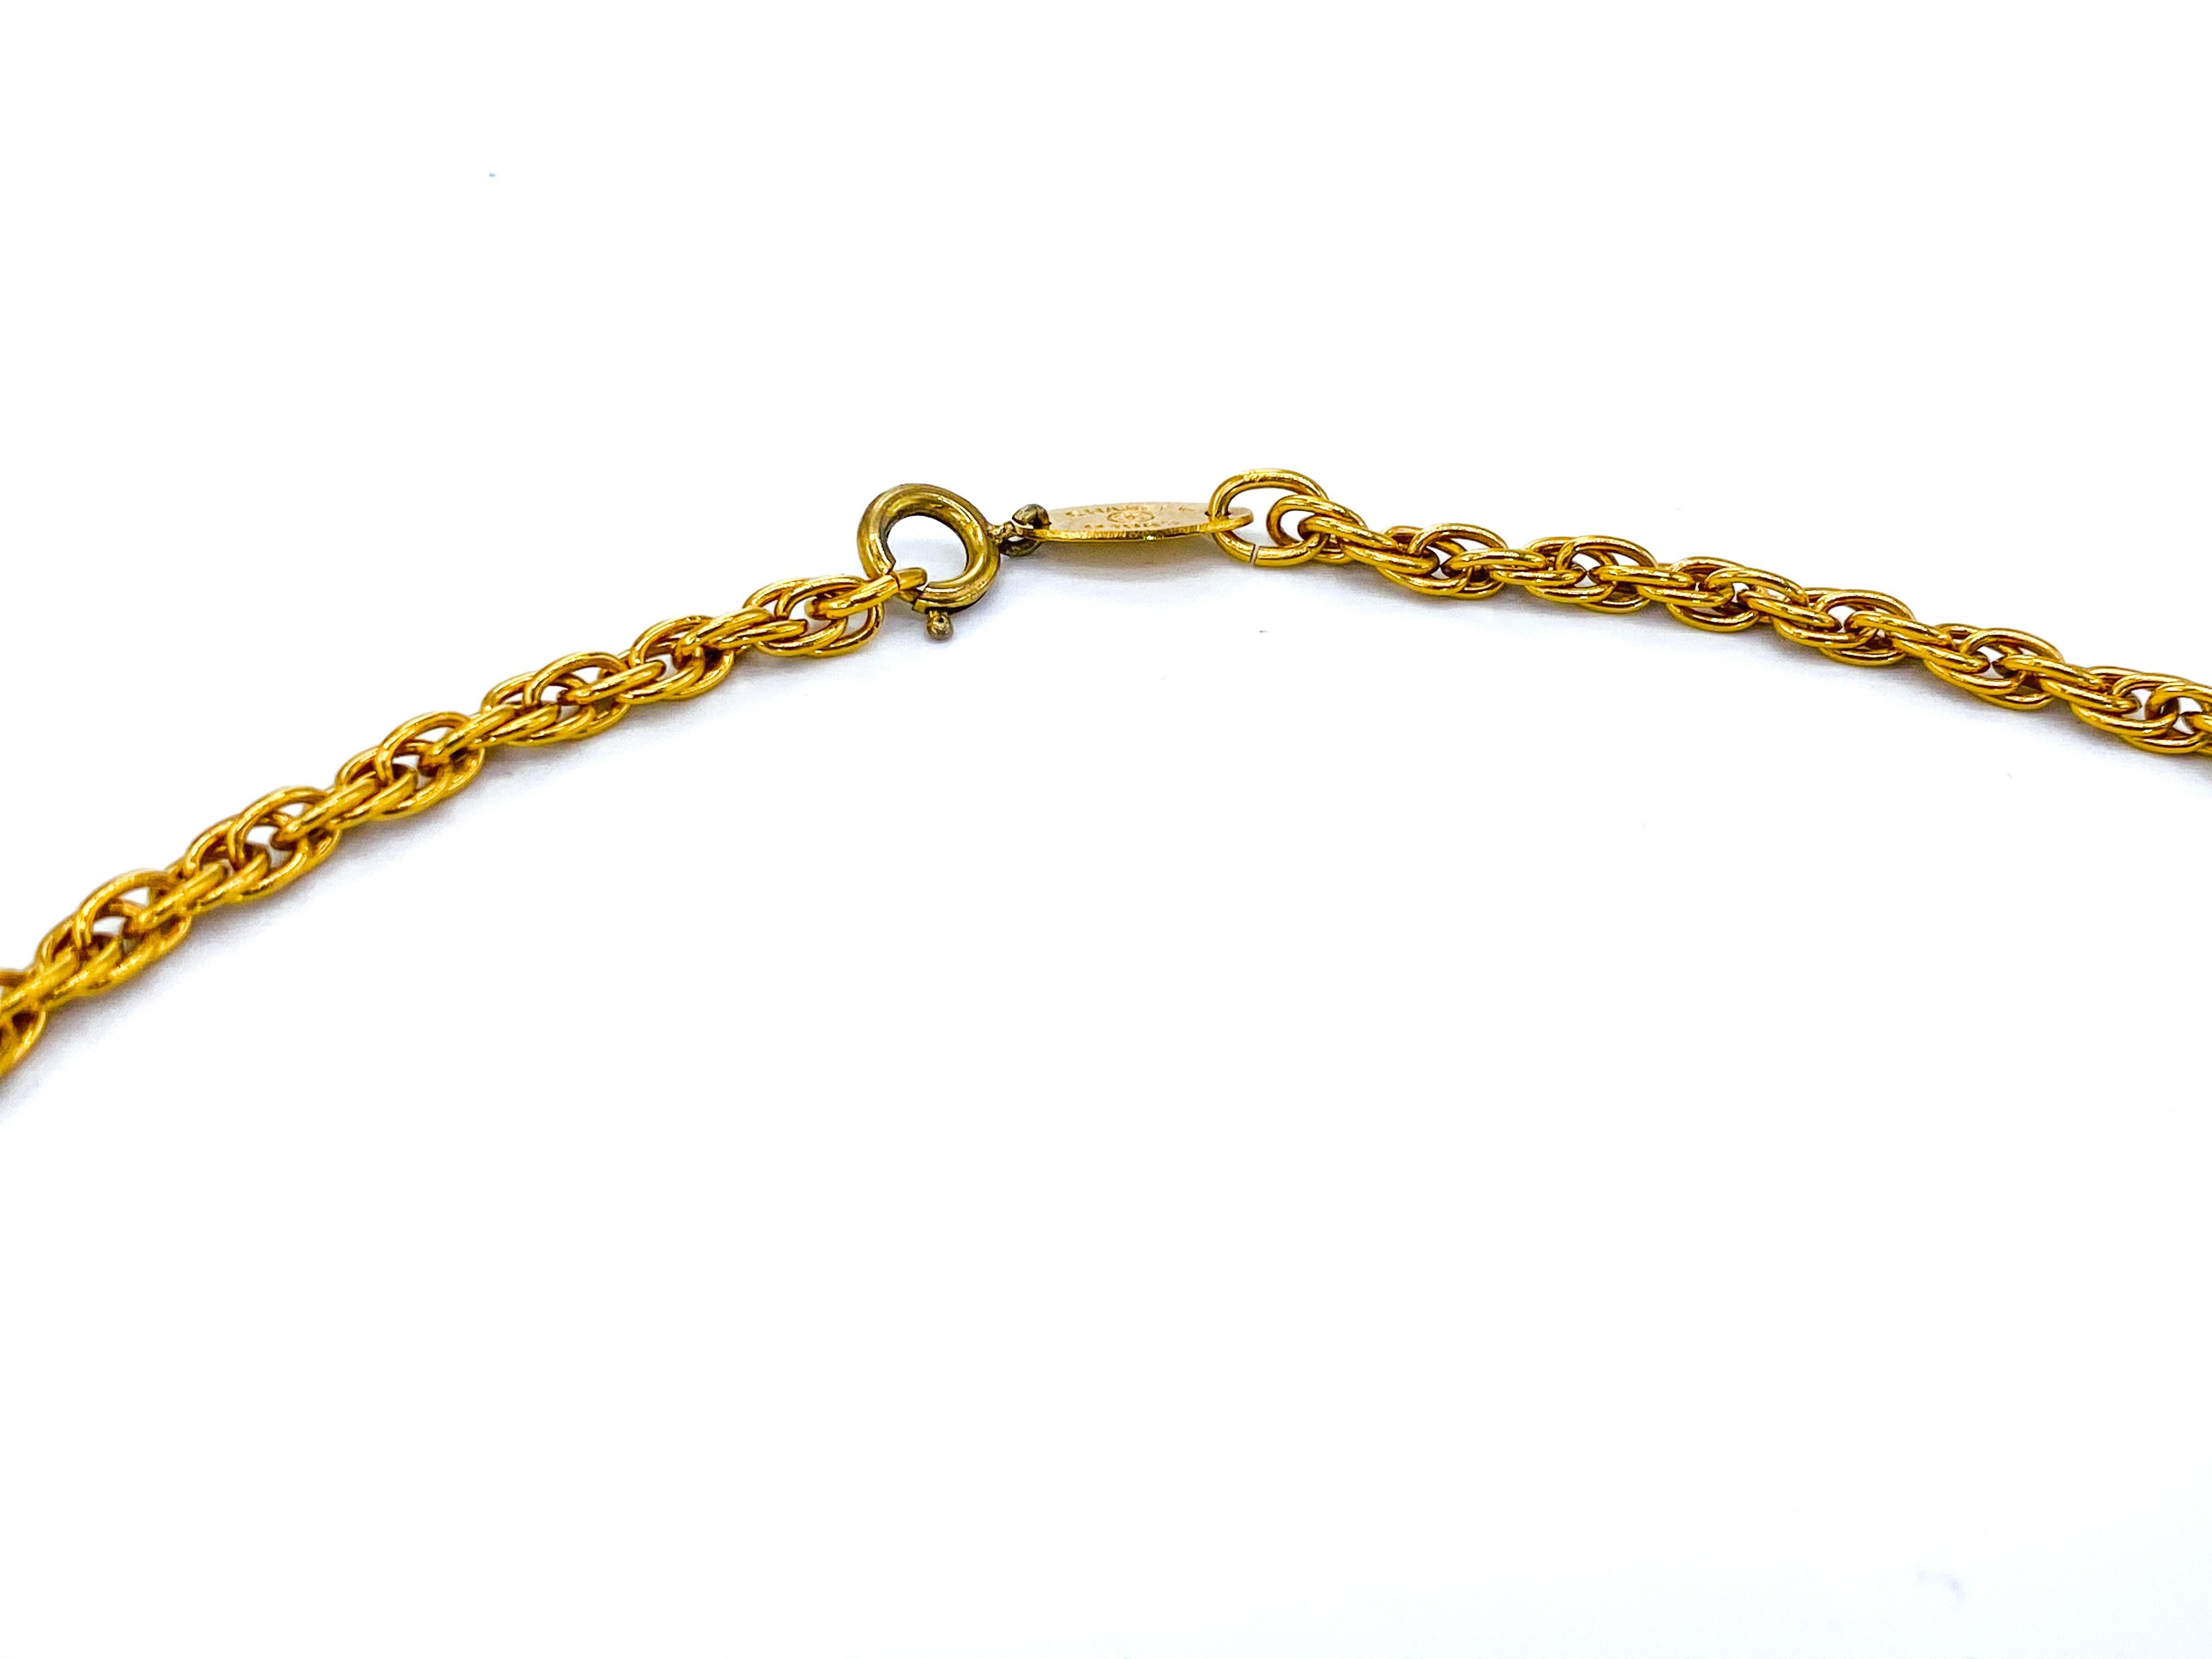 CHANEL Necklace Vintage 1980s Chain Choker 3